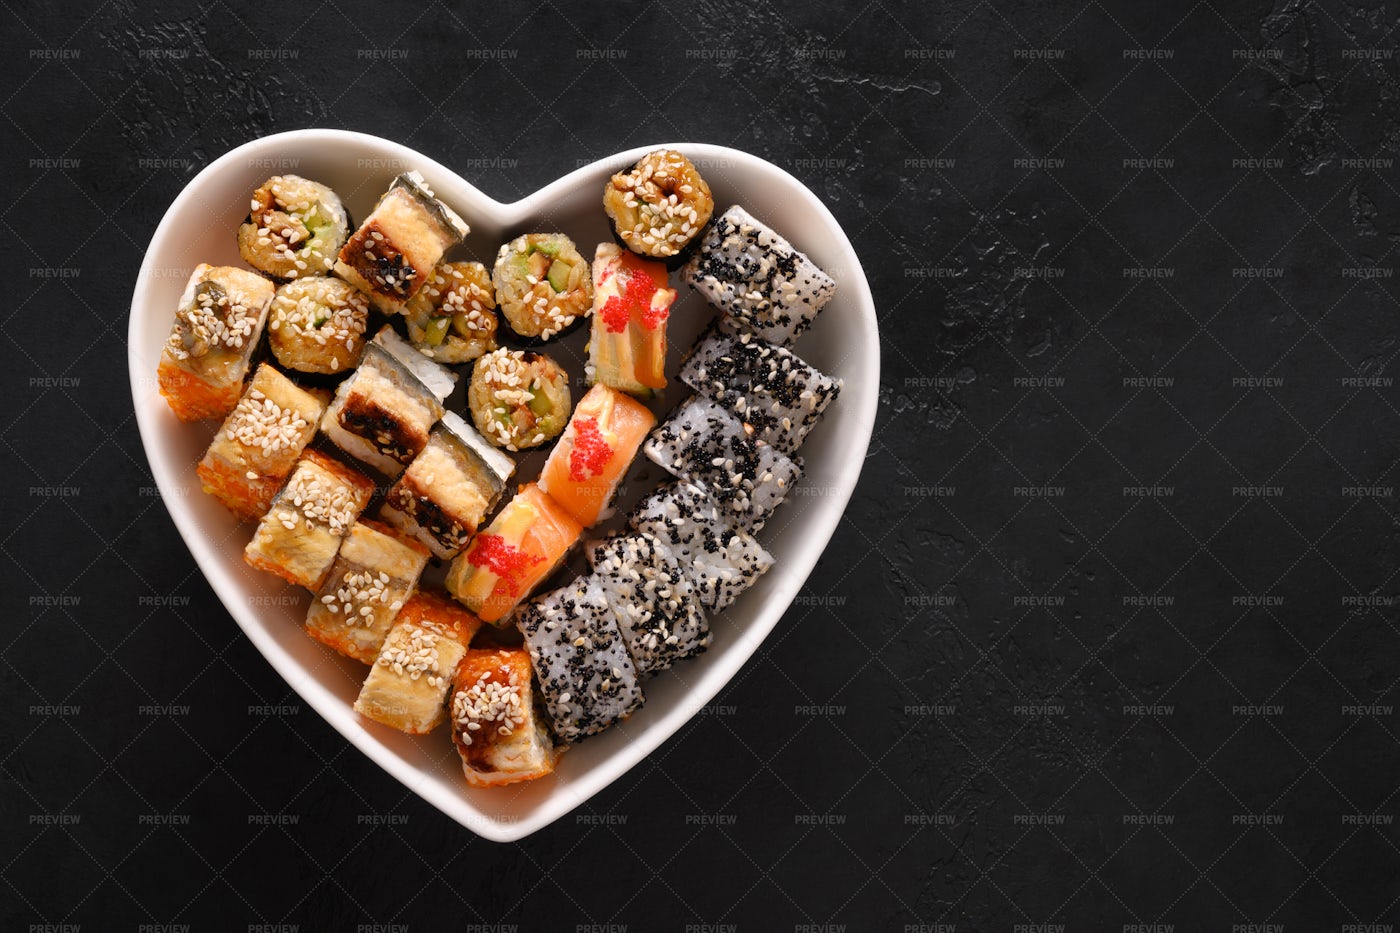 Sushi Set In Heart Plate: Stock Photos